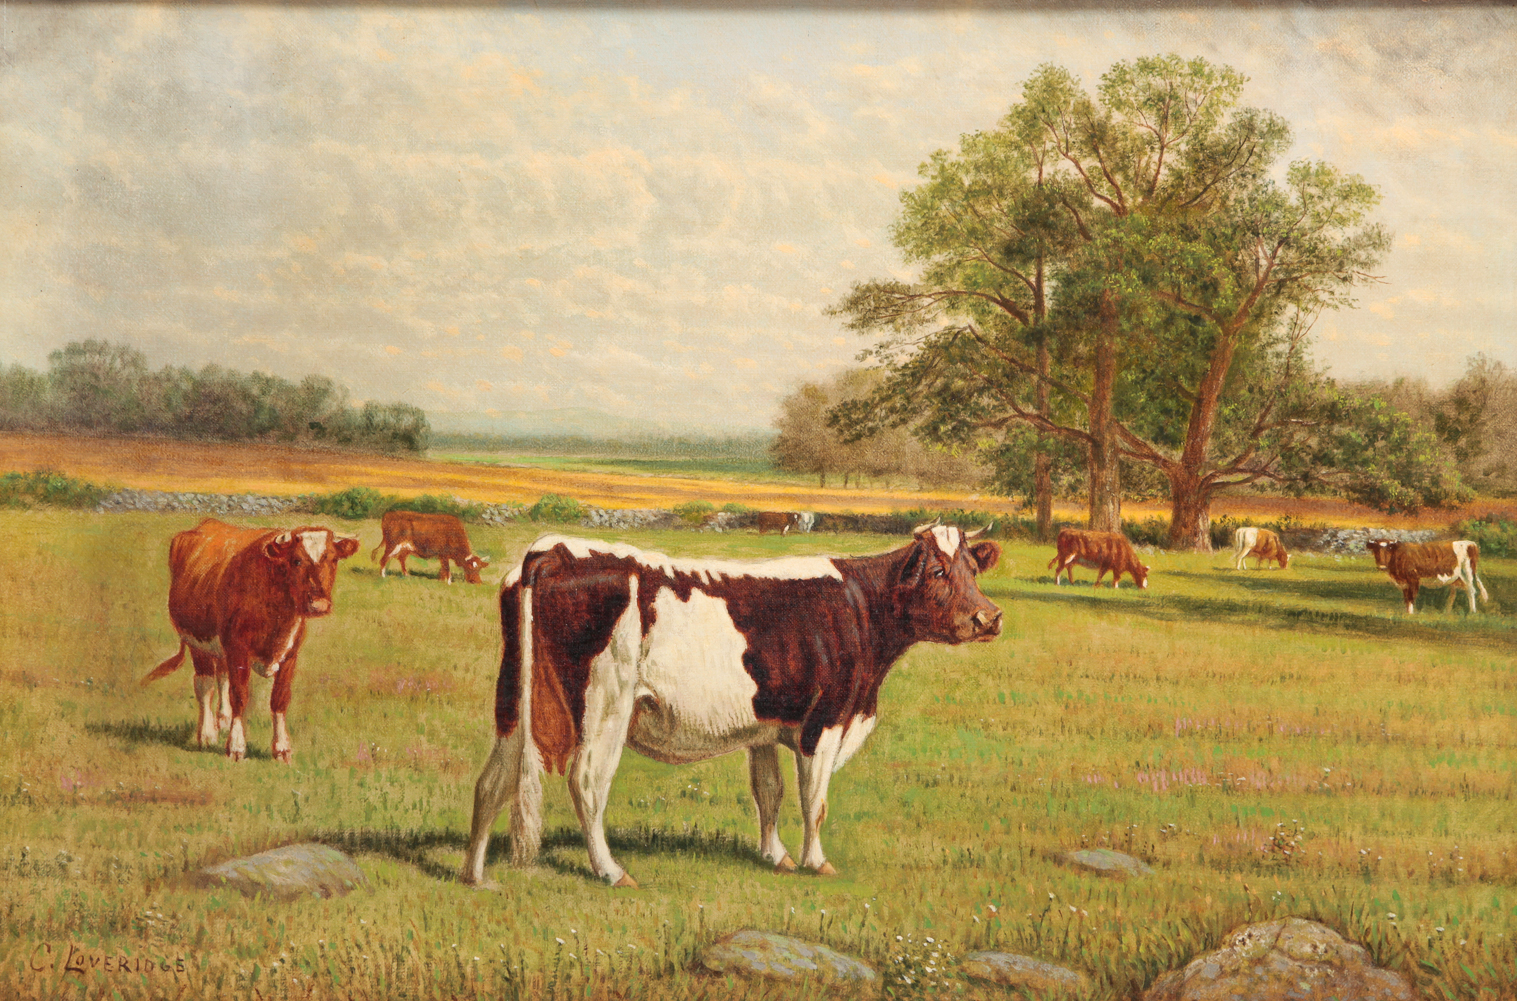 CATTLE BY CLIFTON LOVERIDGE. New